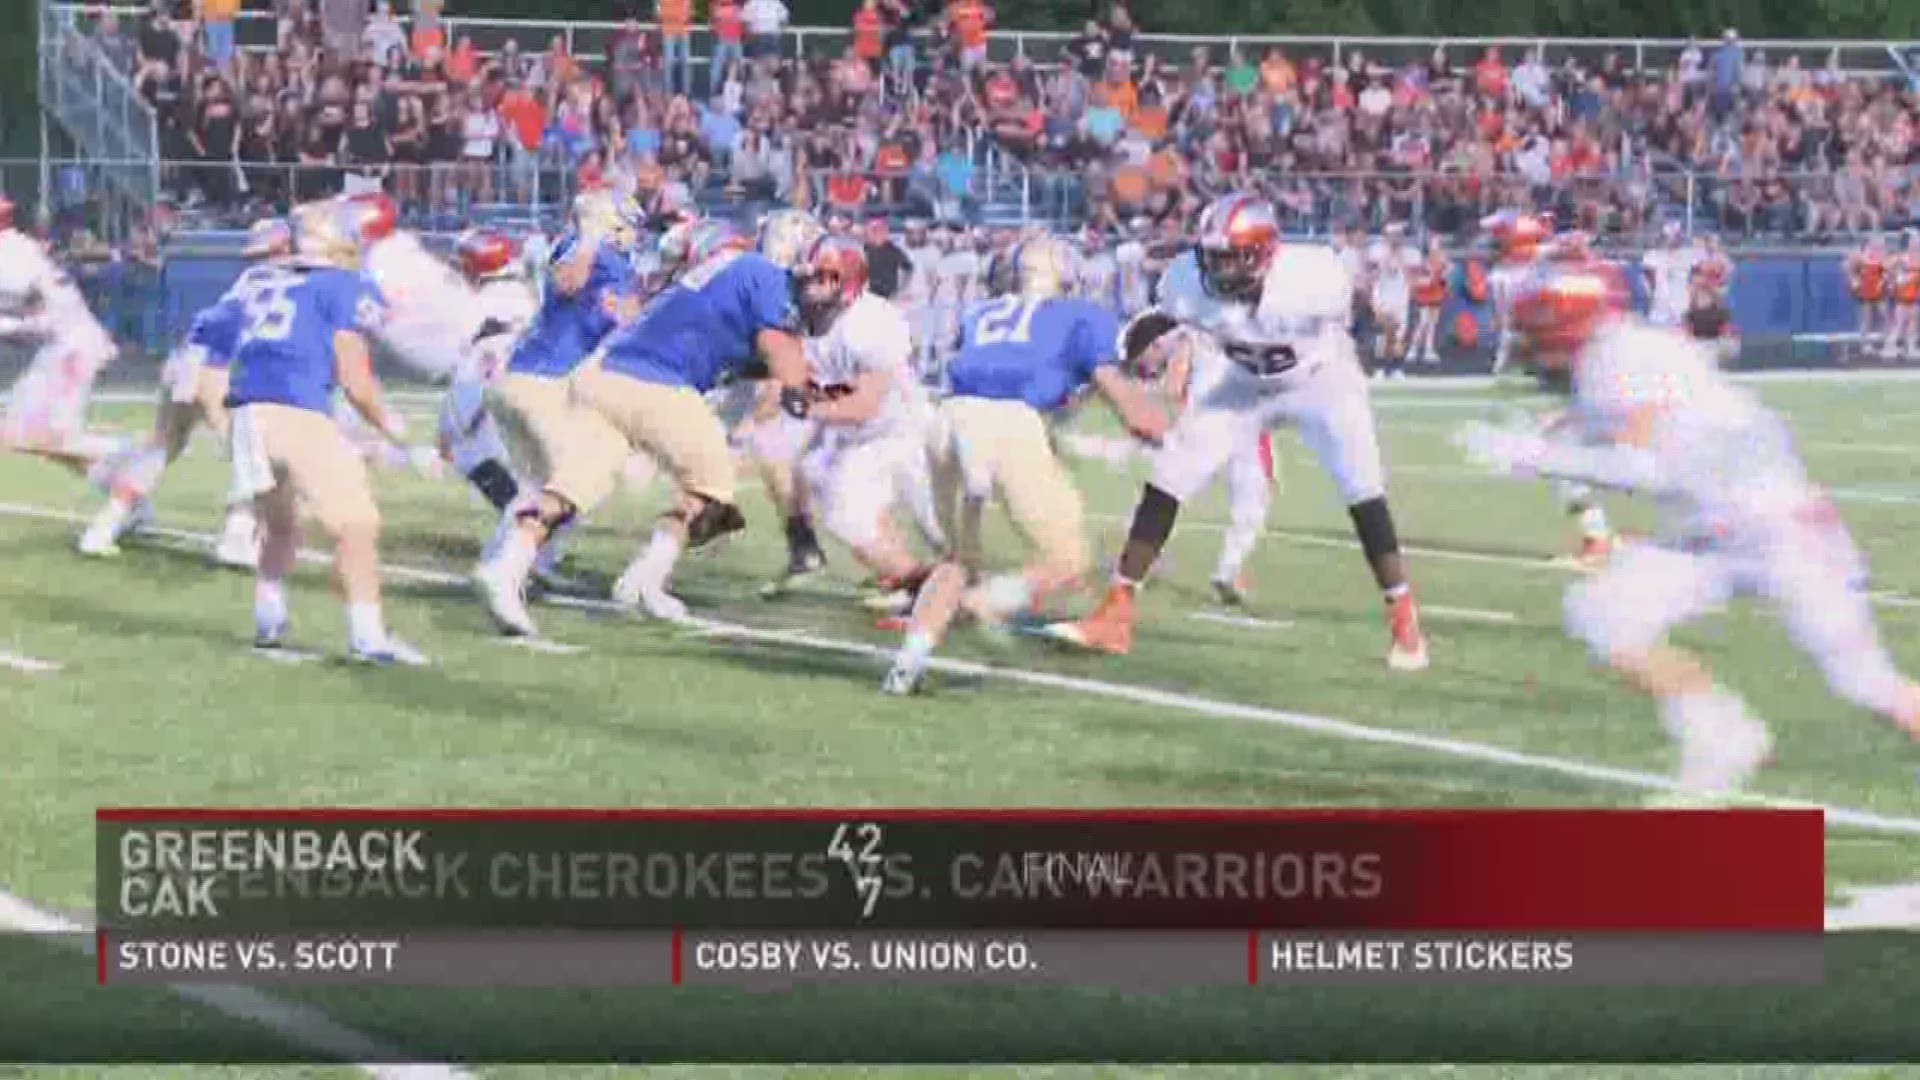 Greenback beats CAK in Knoxville, 42-7.